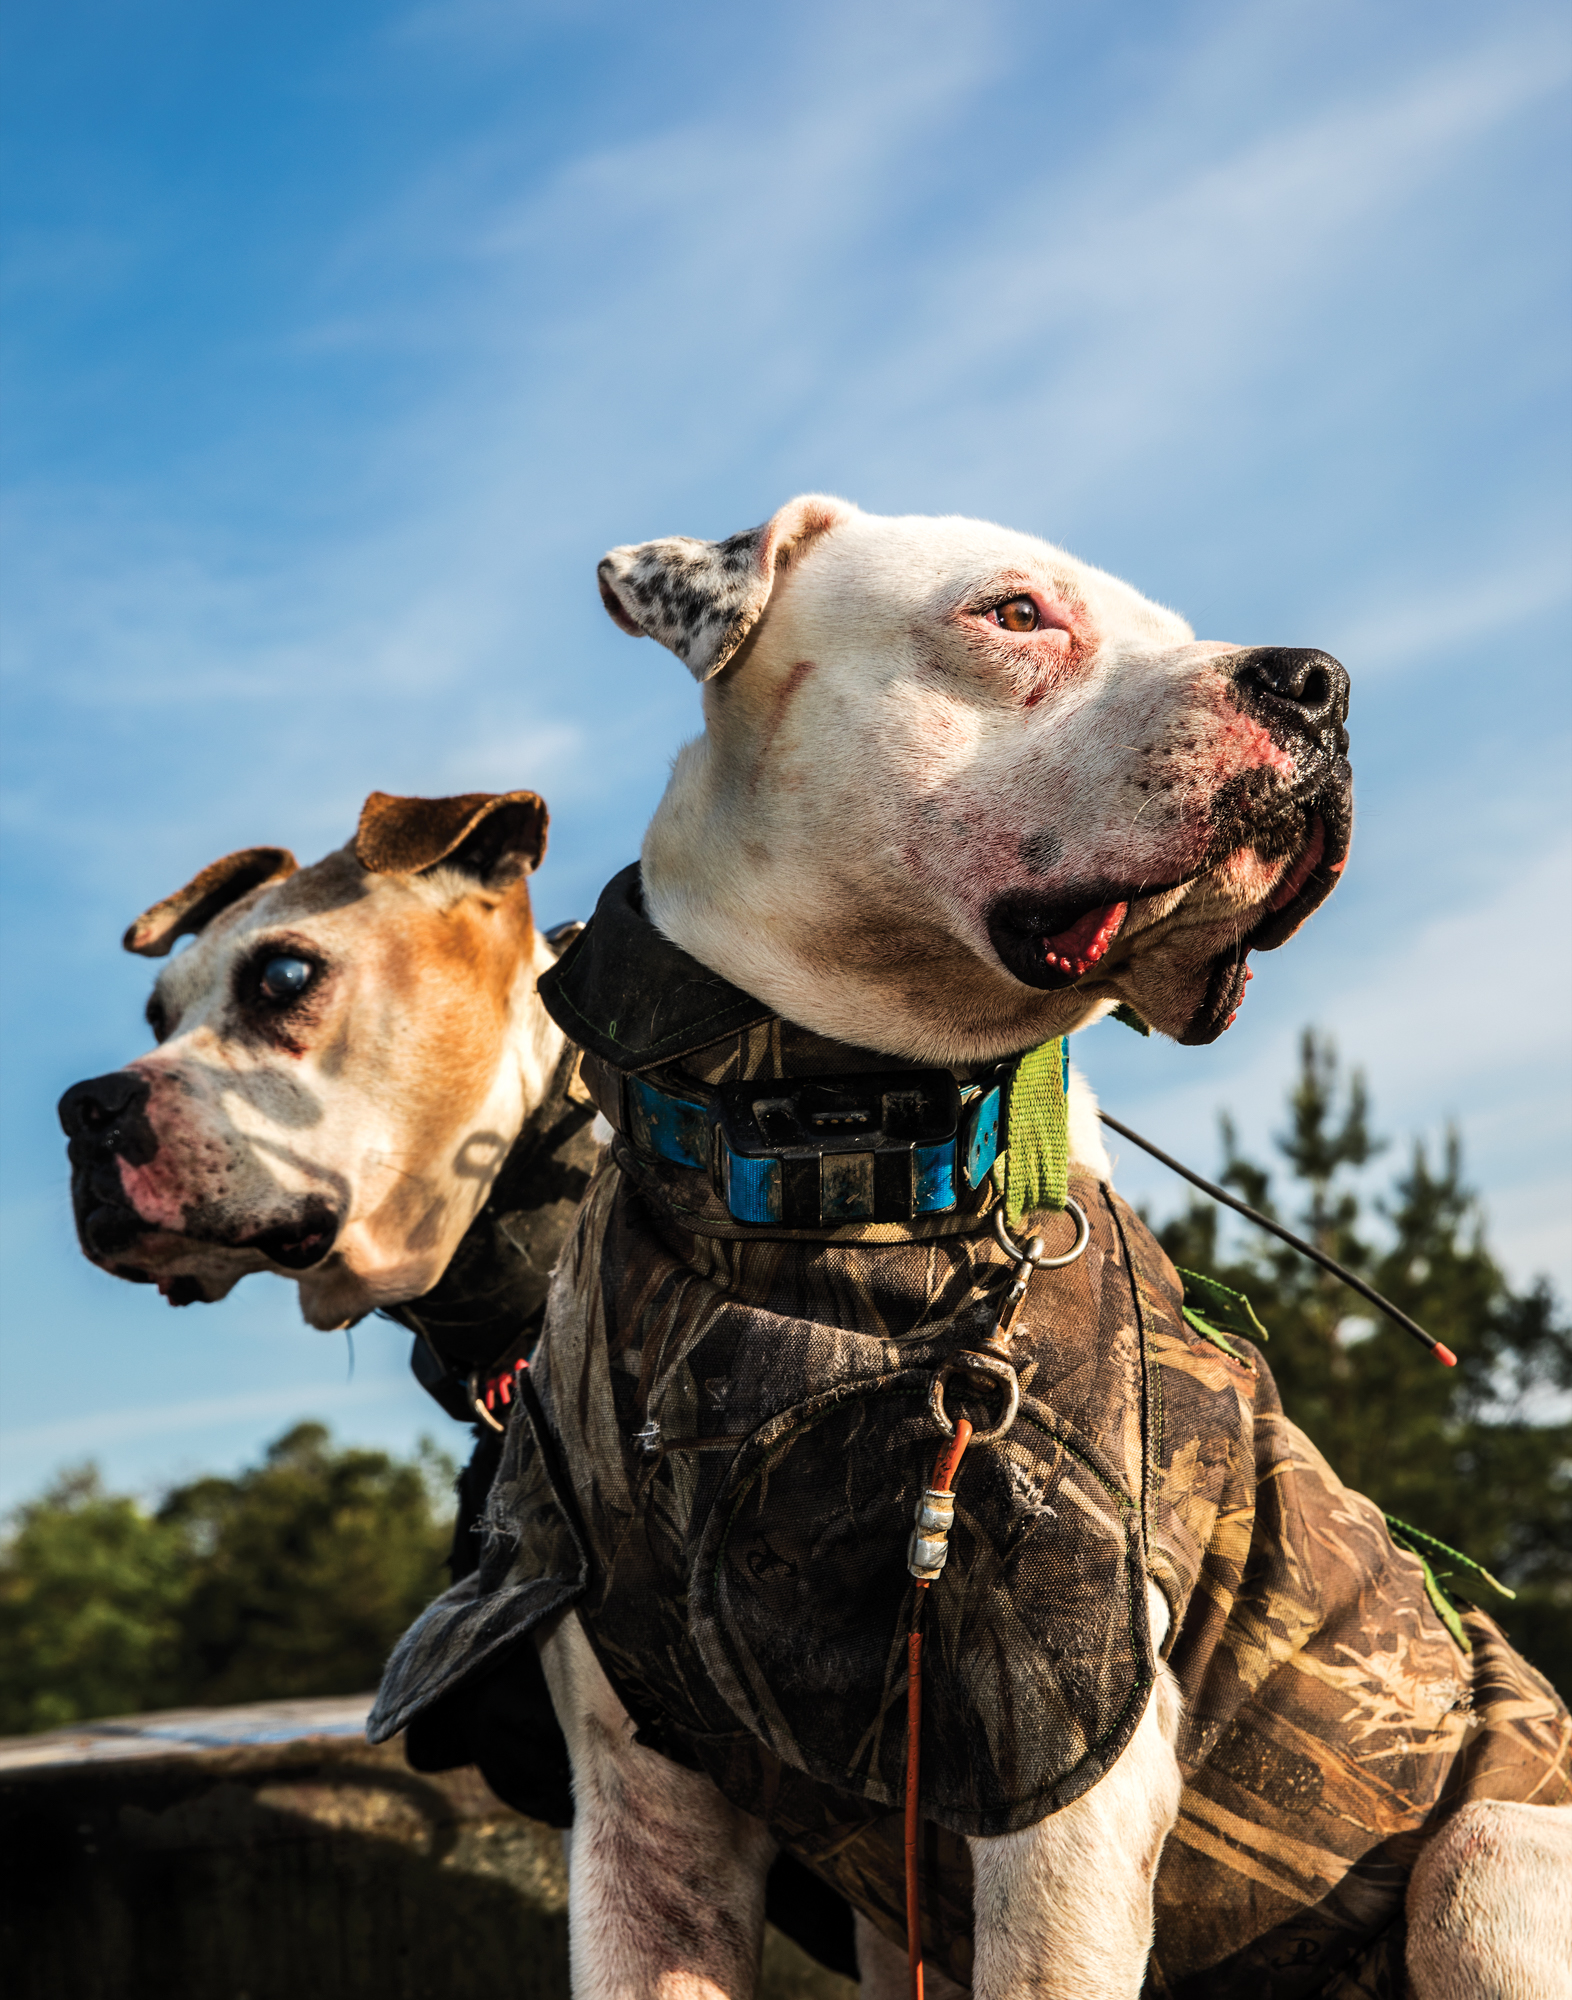 A pair of hog dogs sit beside each other in protective shirts and collars.